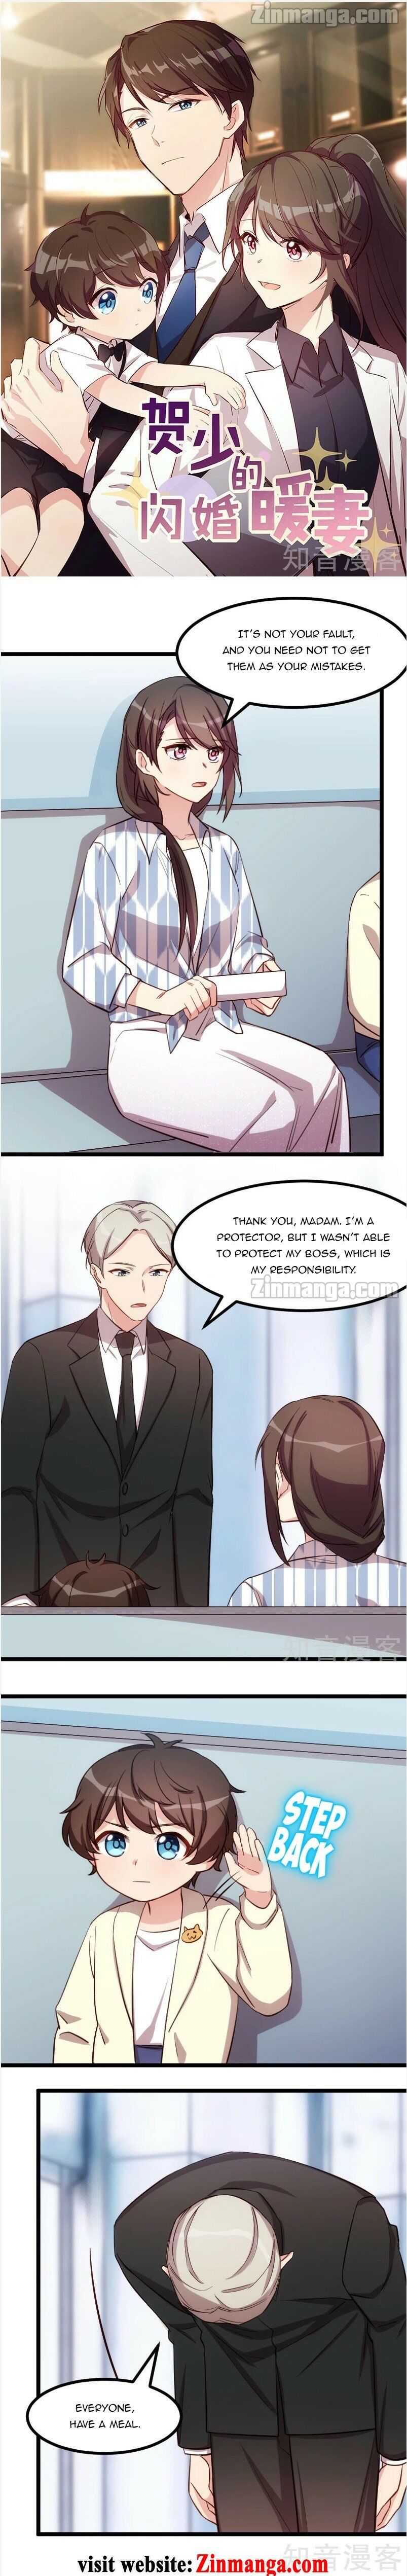 Ceo's Sudden Proposal Chapter 209